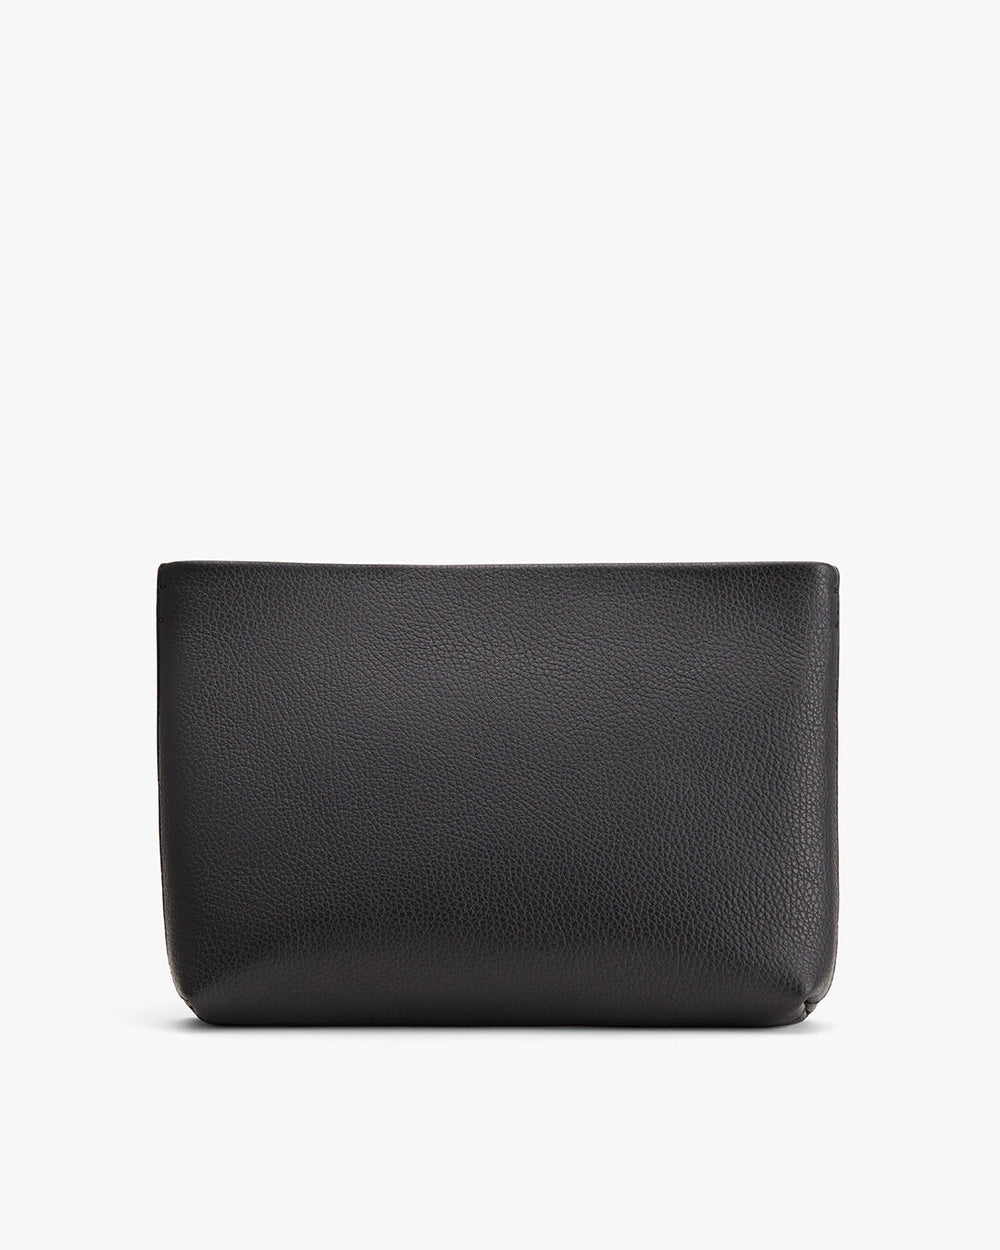 Textured pouch standing upright against a plain background